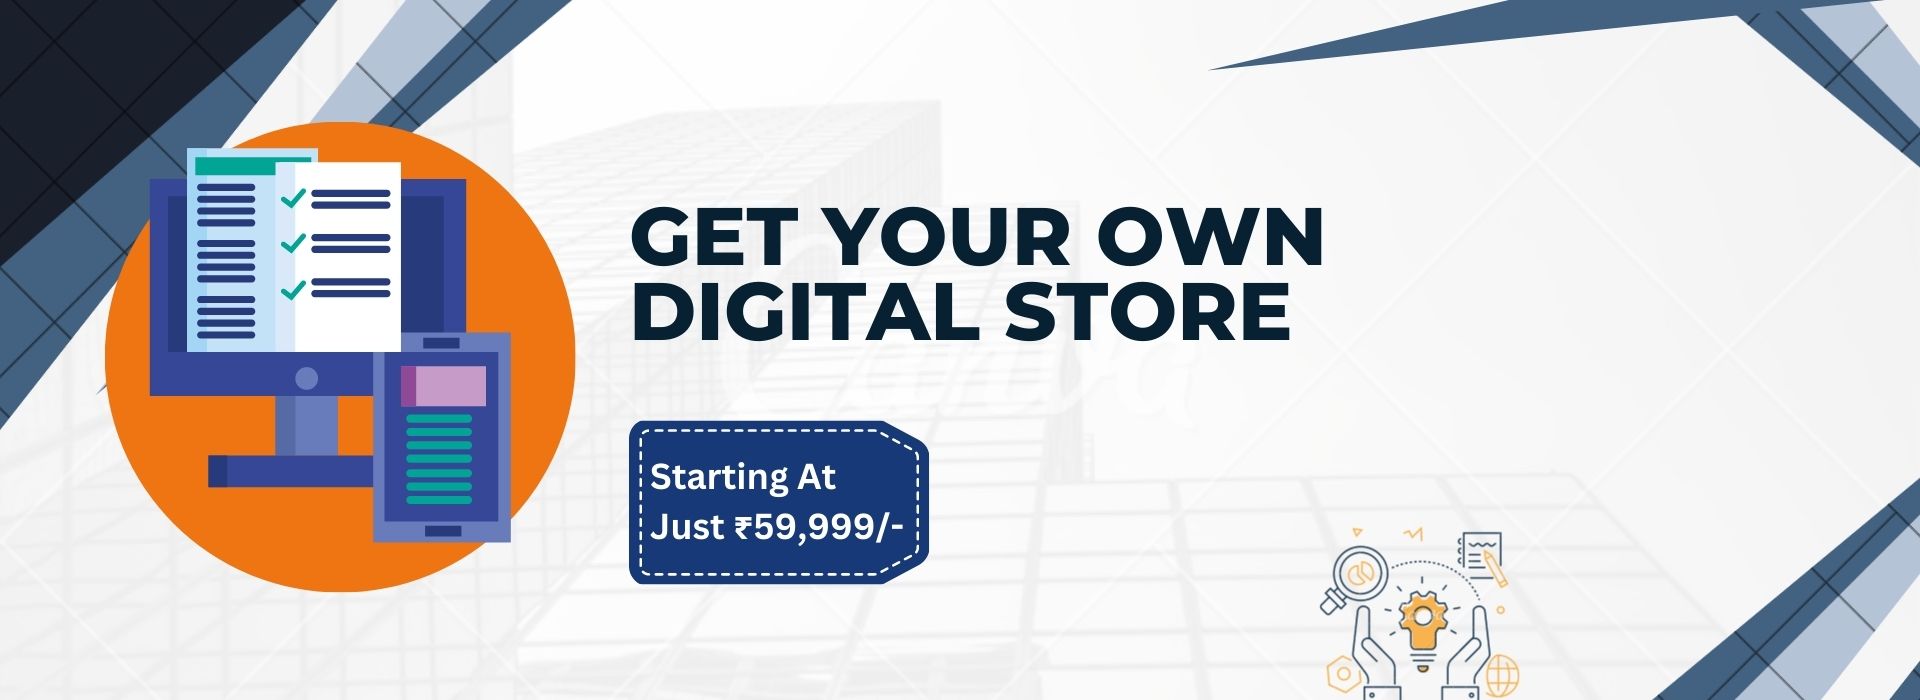 Get your own digital store